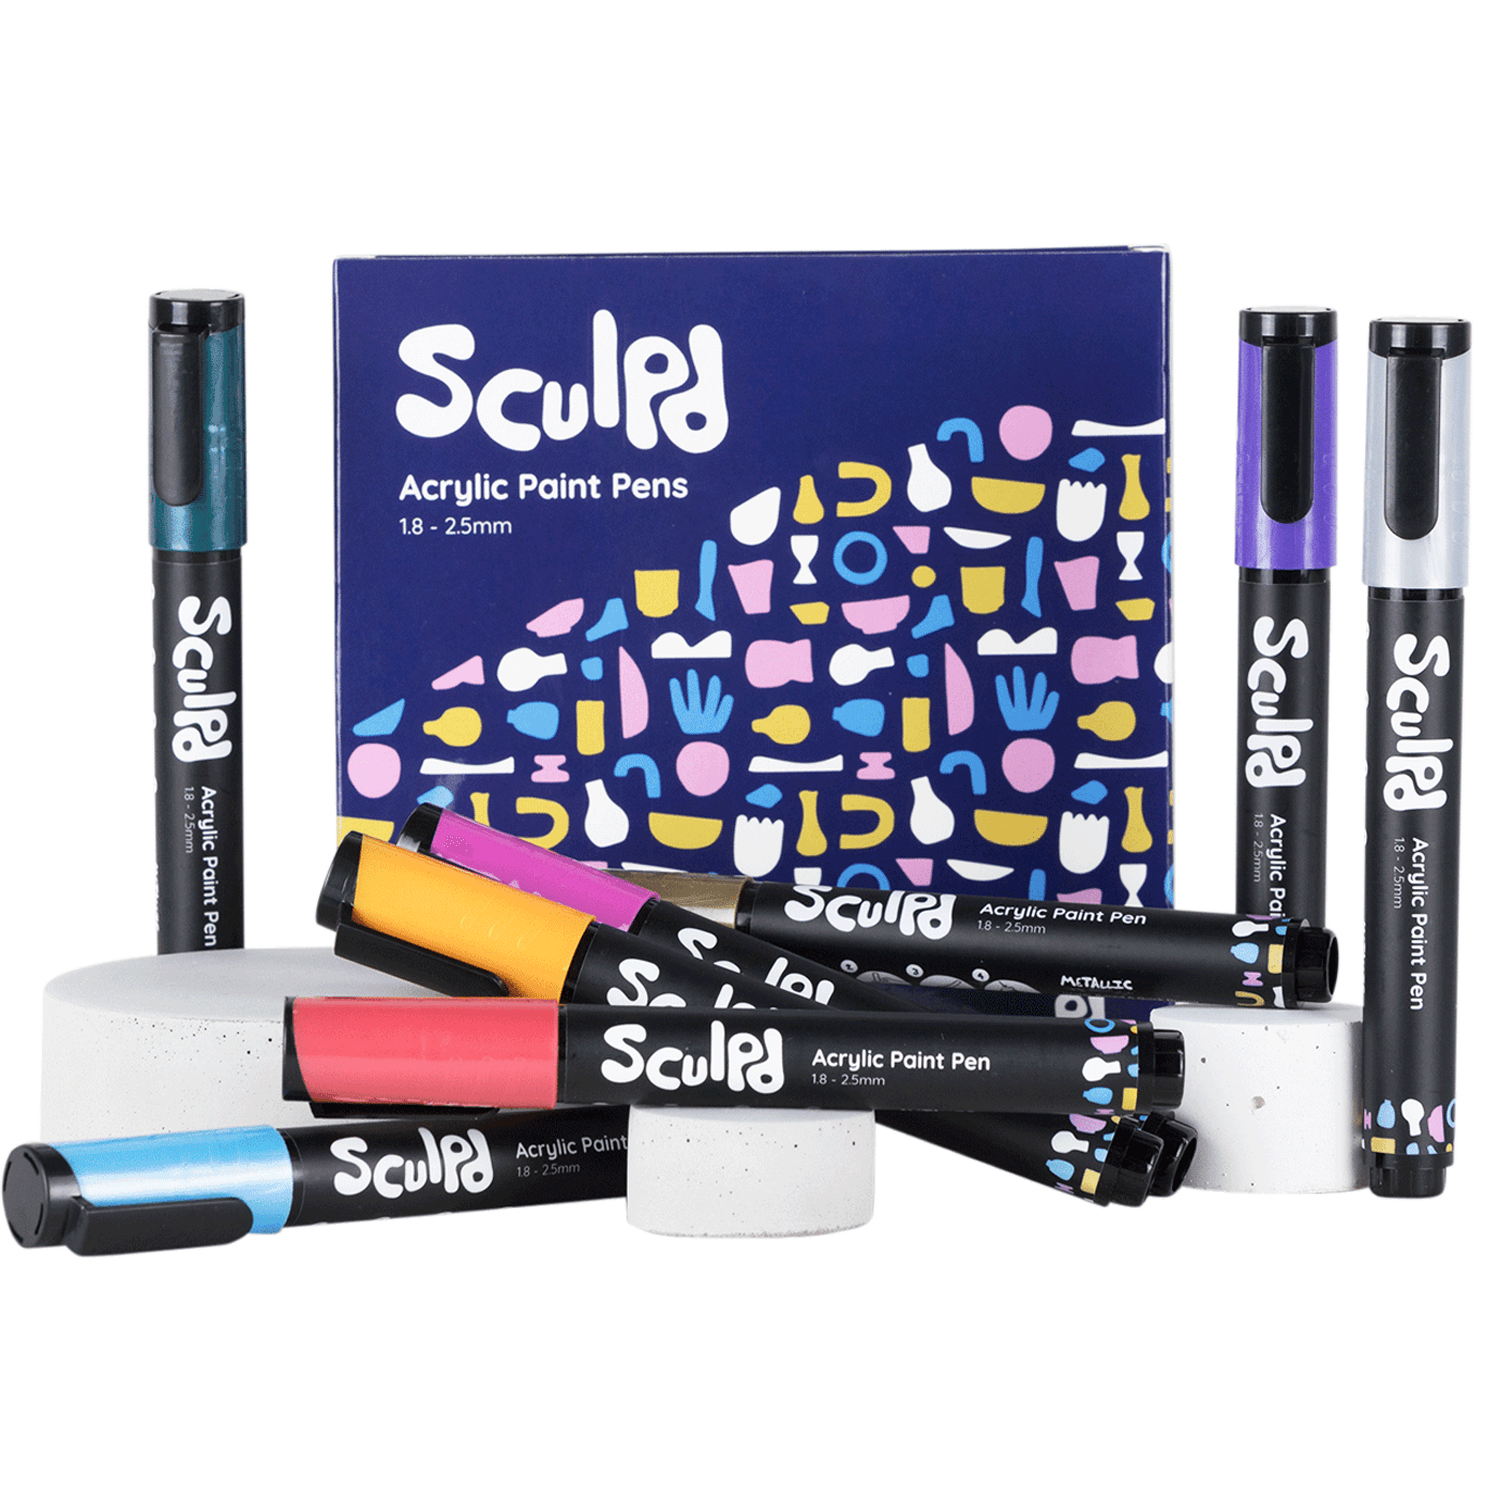 Sculpd Kids Painting Kit, Paint Craft Set for Kids Age 4 to 6, Includes 10  Colour Paint Set, 4 Paint Pens, 2 Canvases, Easels, Magnetic Picture Frame